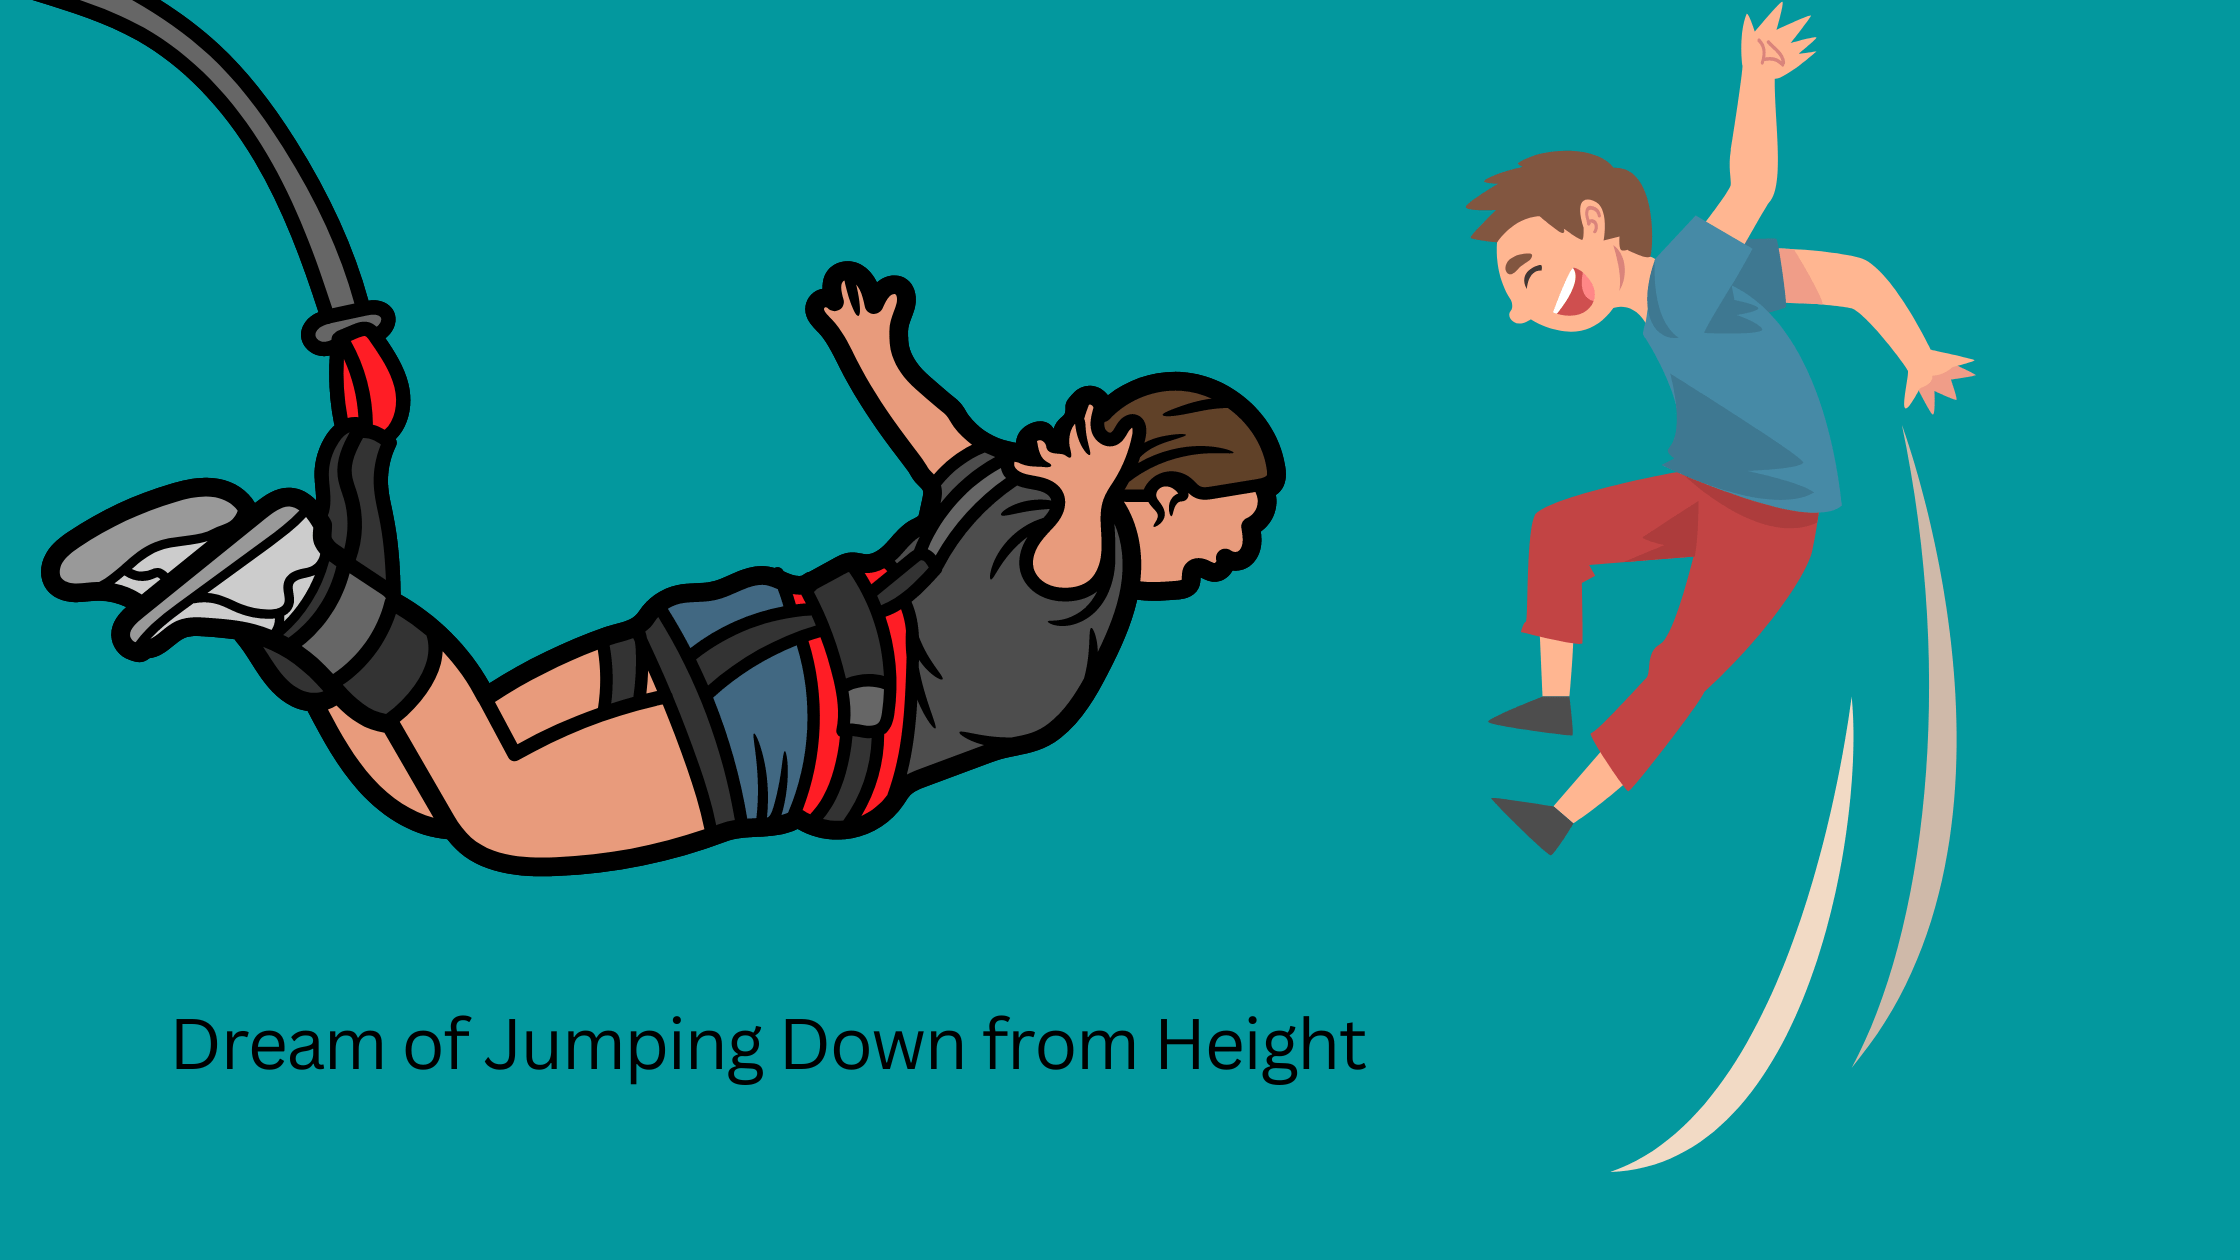 Dream of Jumping Down from Height